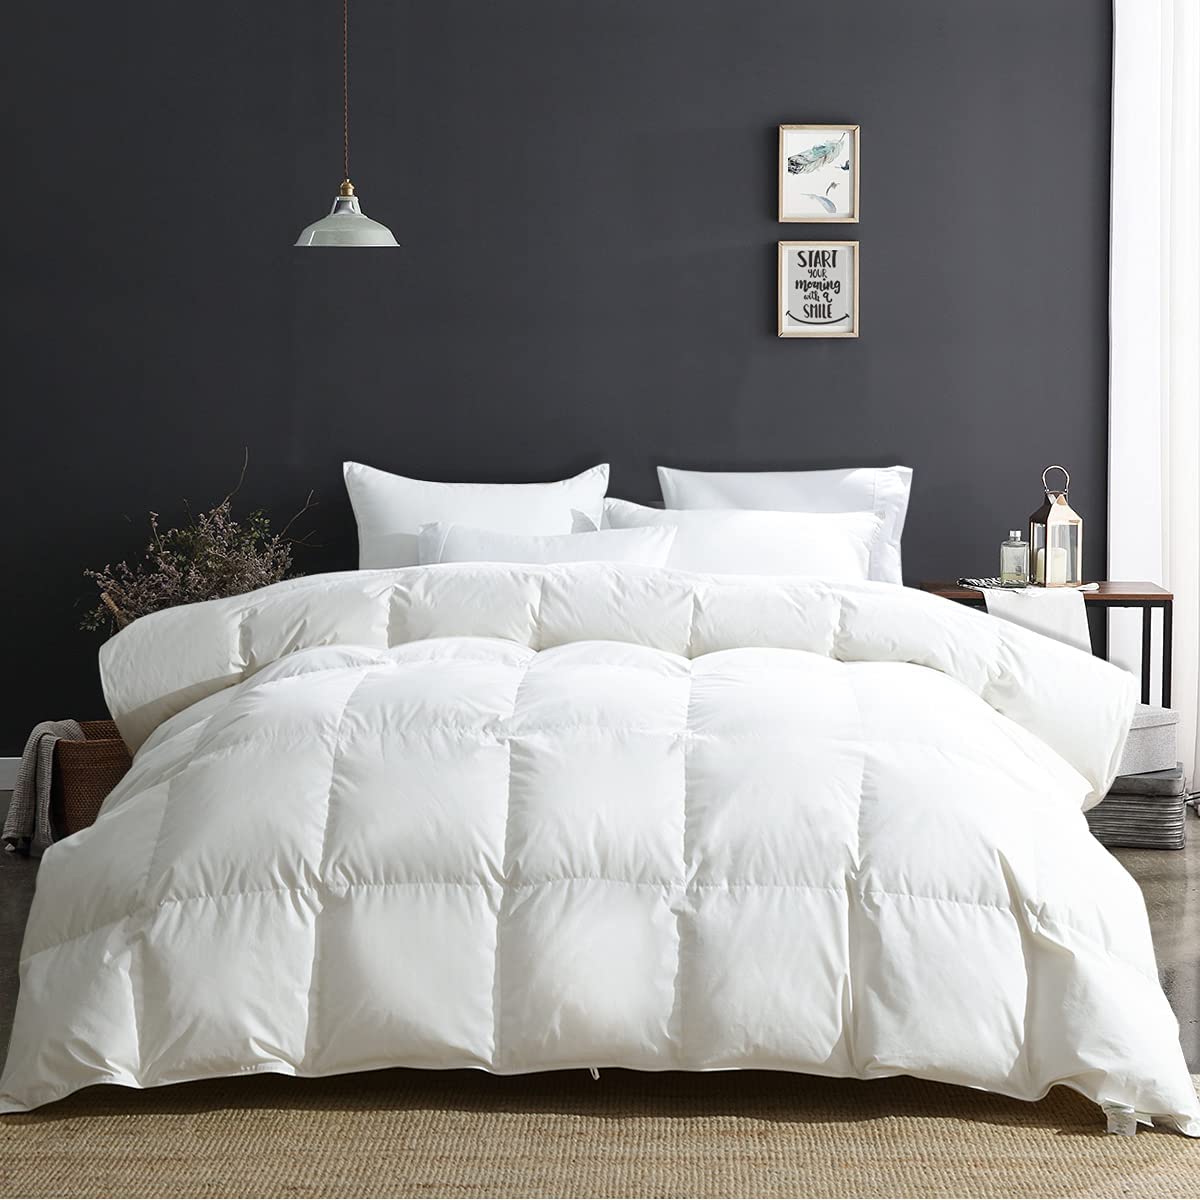 APSMILE Lightweight Feather-Filled Cotton Comforter